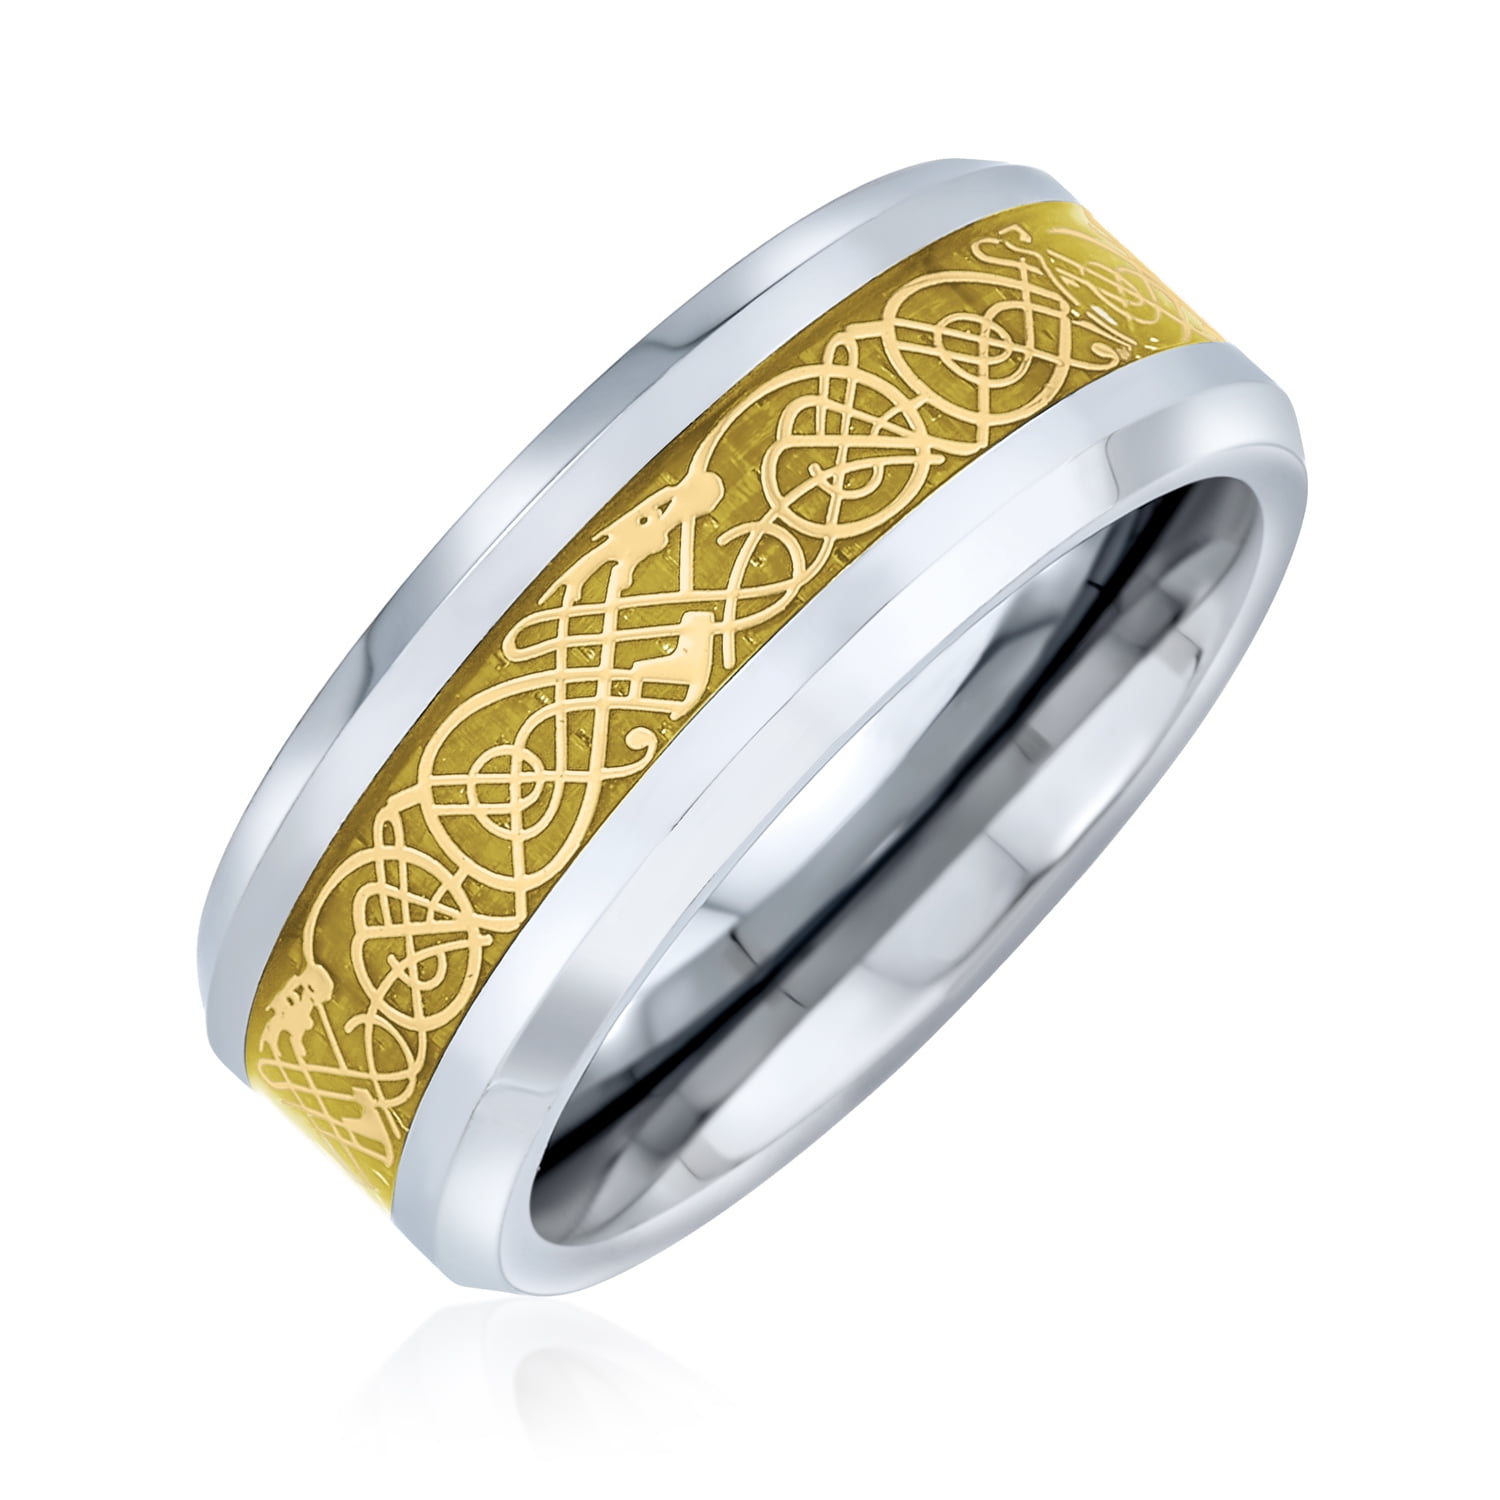 8MM Titanium I Love You Gold IP Silver Satin Celtic Design Wedding Band Ring Size 7 to 13 